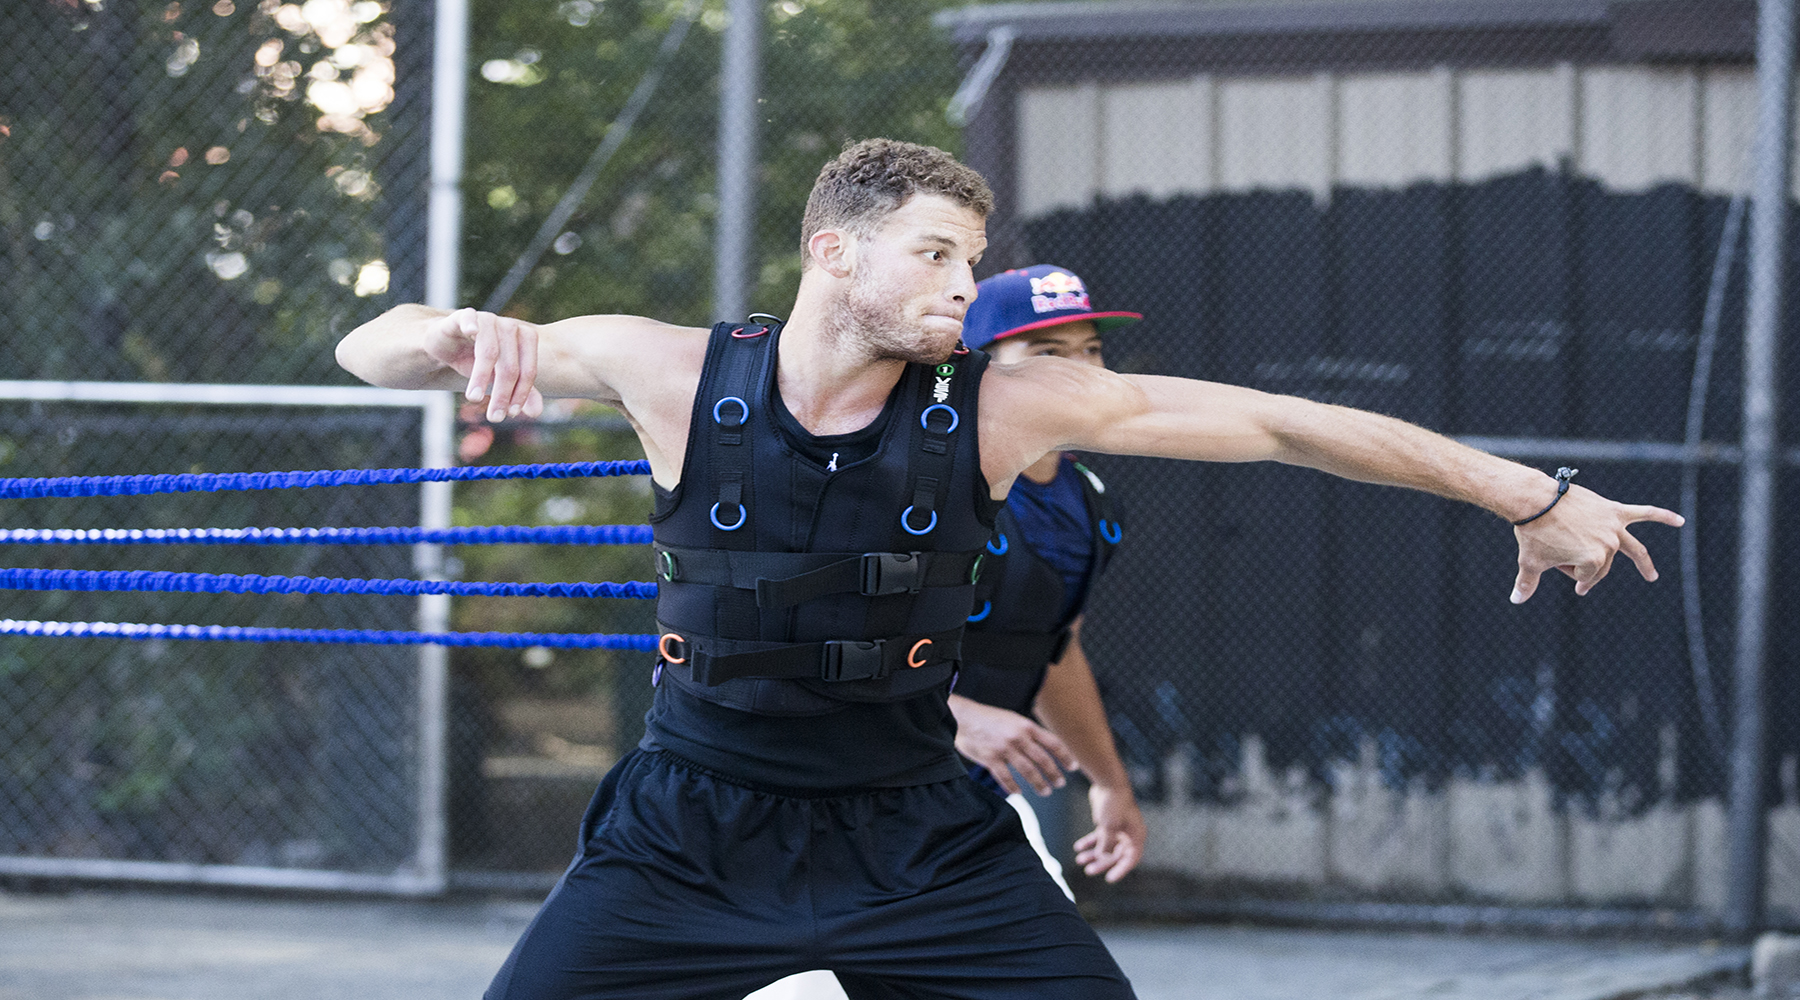 NBA player Blake Griffin trains at the the West 4th Street handball courts in New York, NY USA on 15 September, 2015.    // Rob Tringali/Red Bull Content Pool // P-20151007-00510 // Usage for editorial use only // Please go to www.redbullcontentpool.com for further information. //